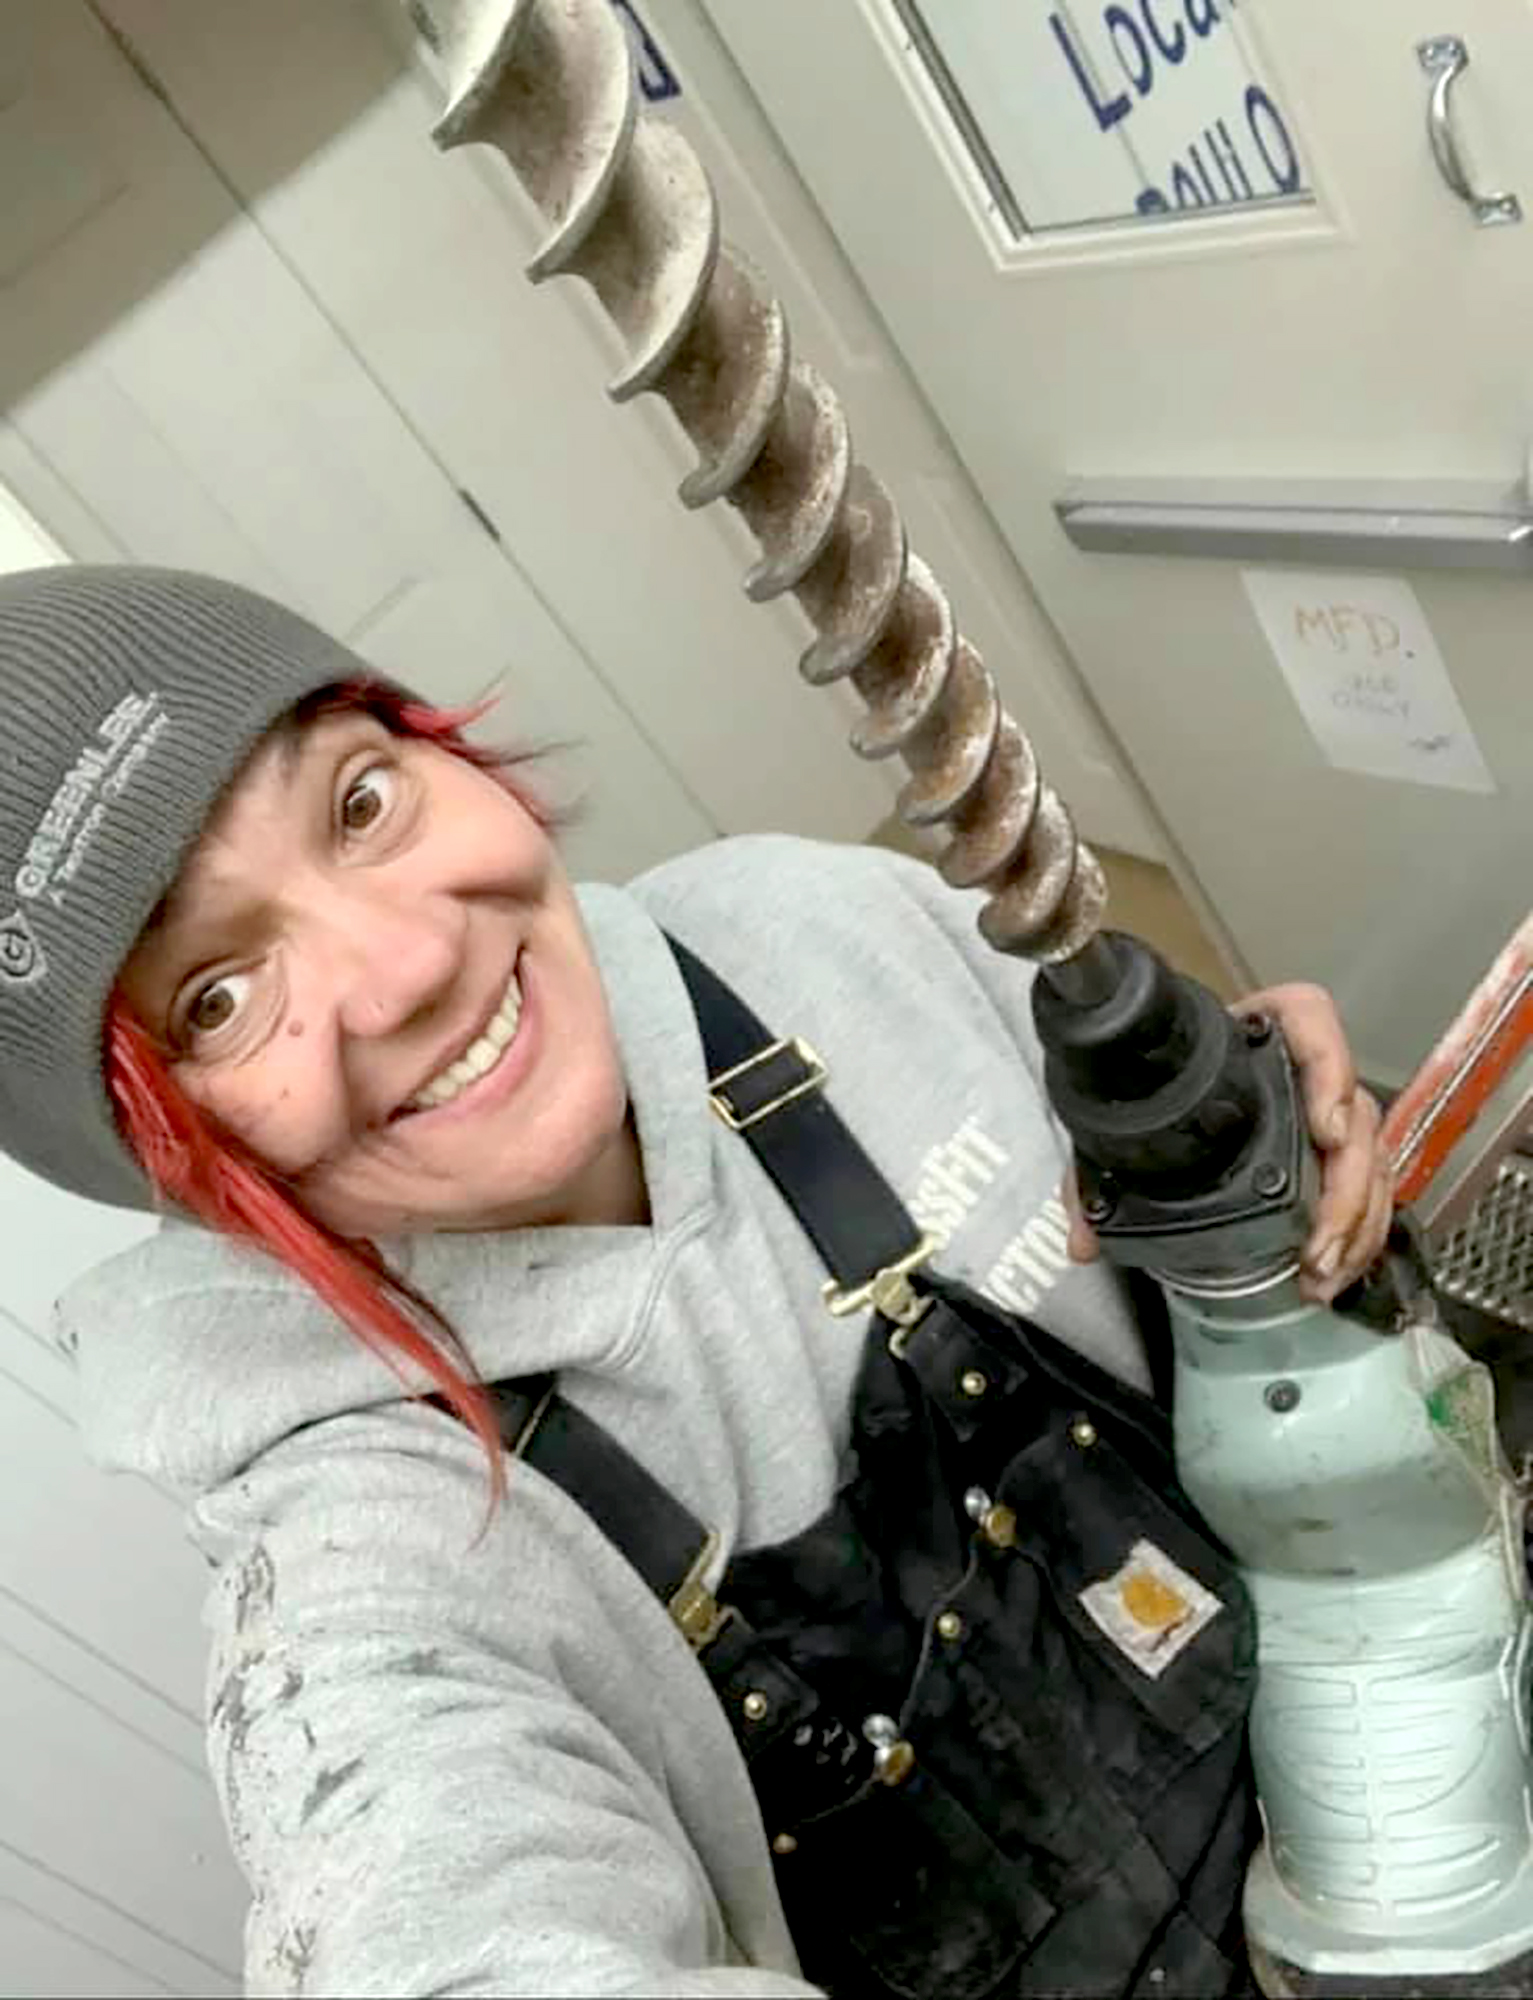 TIna Young holding a large tool grinning at the camera - power emergencies, renovations